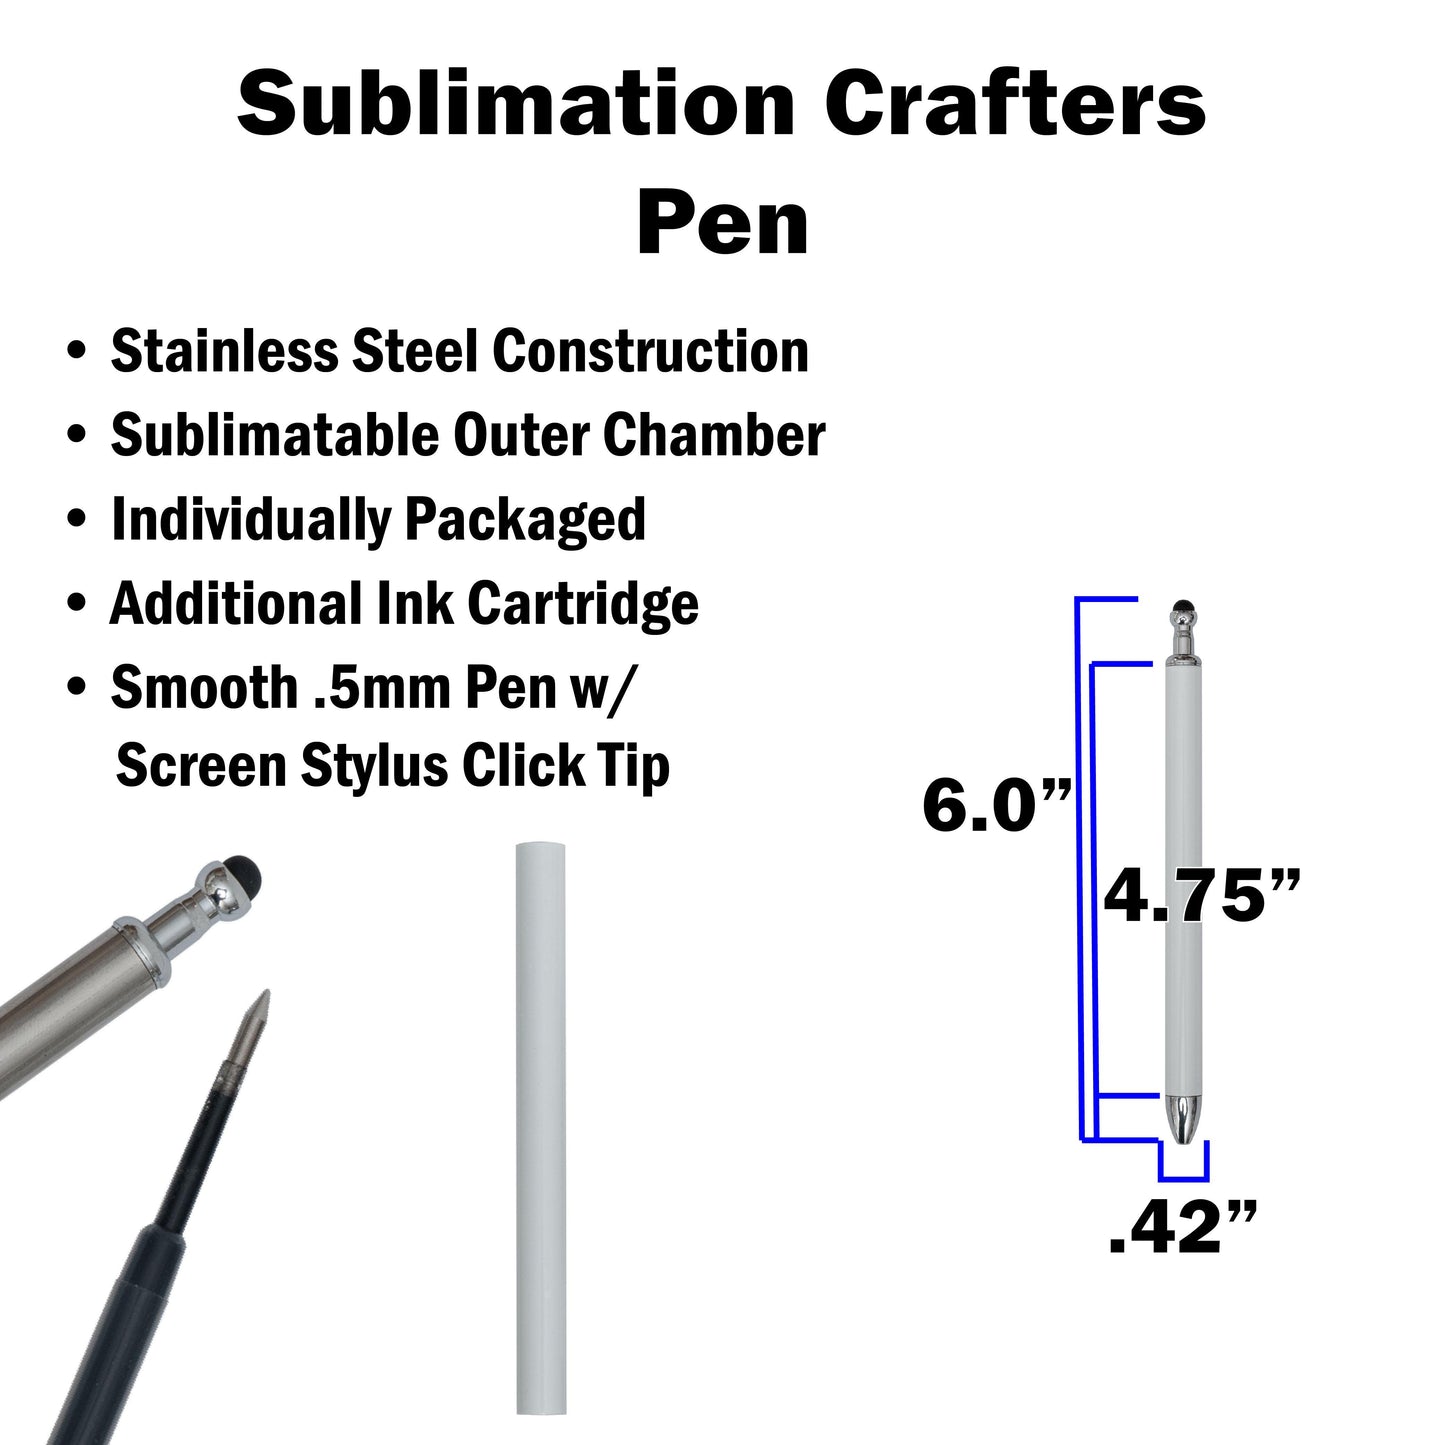 The Crafters Gel Pen